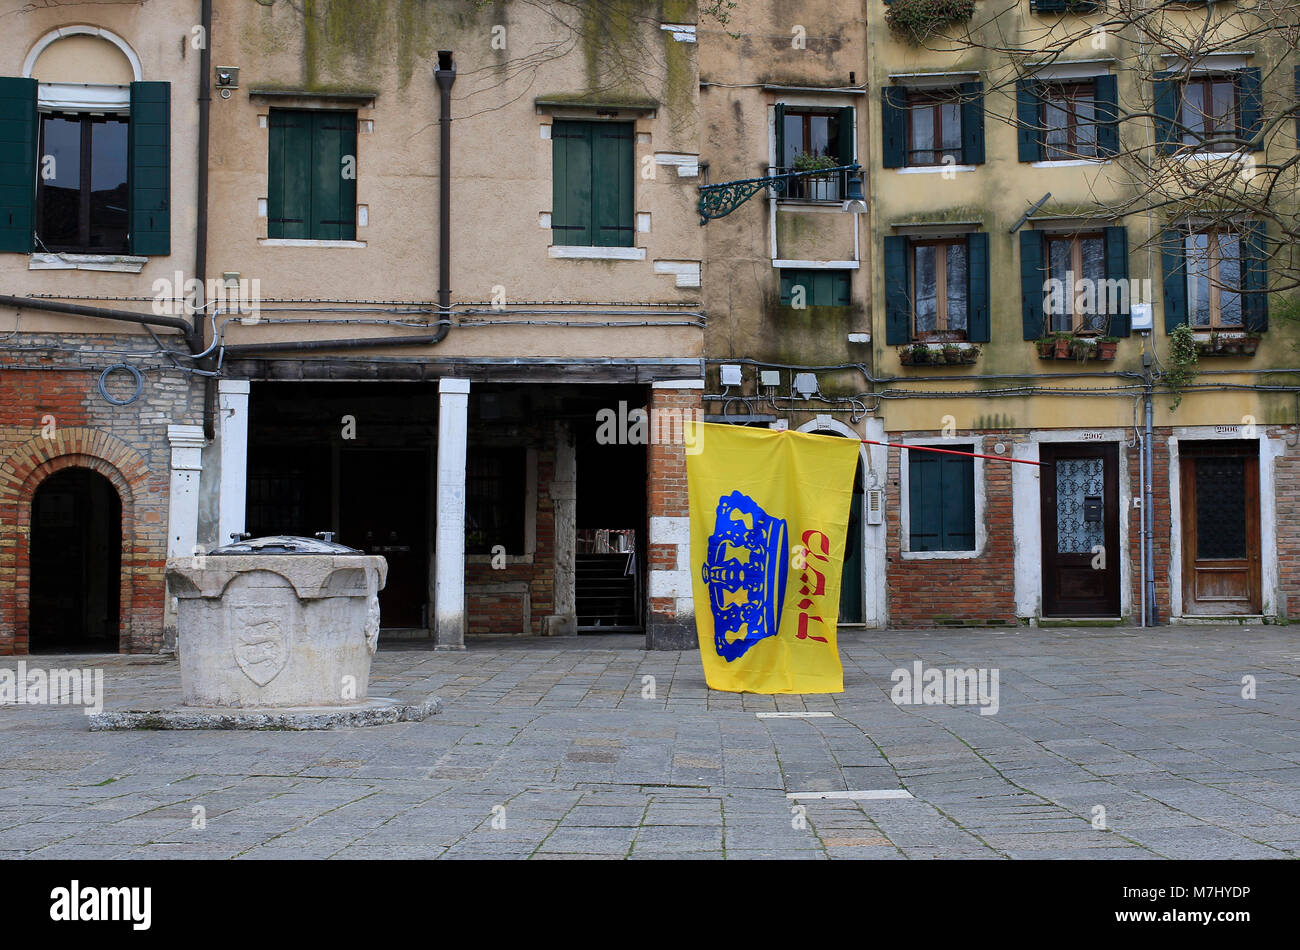 Venice, Italy. 10th, Mar 2018.  A member of Jewish Community of Venice, take a flag after the celebration of Shabbat day, in the Campo del Ghetto Nuovo in Venice (Cannaregio district). The 'Campo del Ghetto Nuovo' became the heart of the Jewish community in Venice. The Campo del Ghetto Nuovo is the true center of the Jewish Ghetto of Venice. This ghetto was the first in the world and took its name from an existing foundry where they melted or 'threw' the metals needed for naval construction in the Arsenal. Hence the name 'jet' and therefore 'ghetto', in which everyone now recognizes a place of Stock Photo